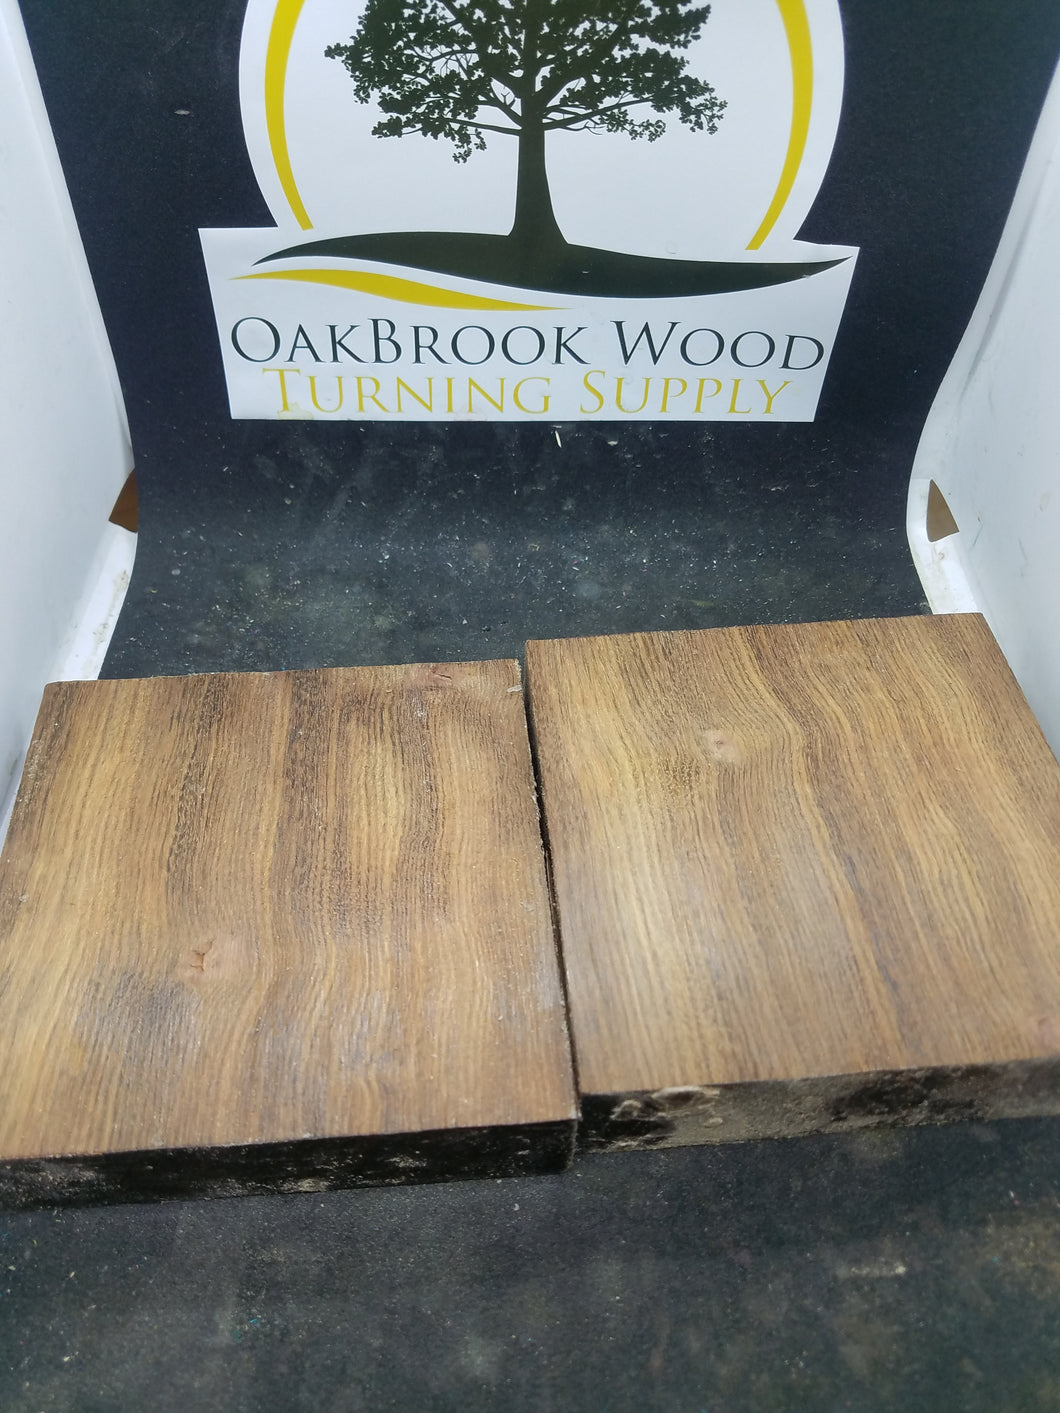 Chechen - Oakbrook Wood Turning Supply